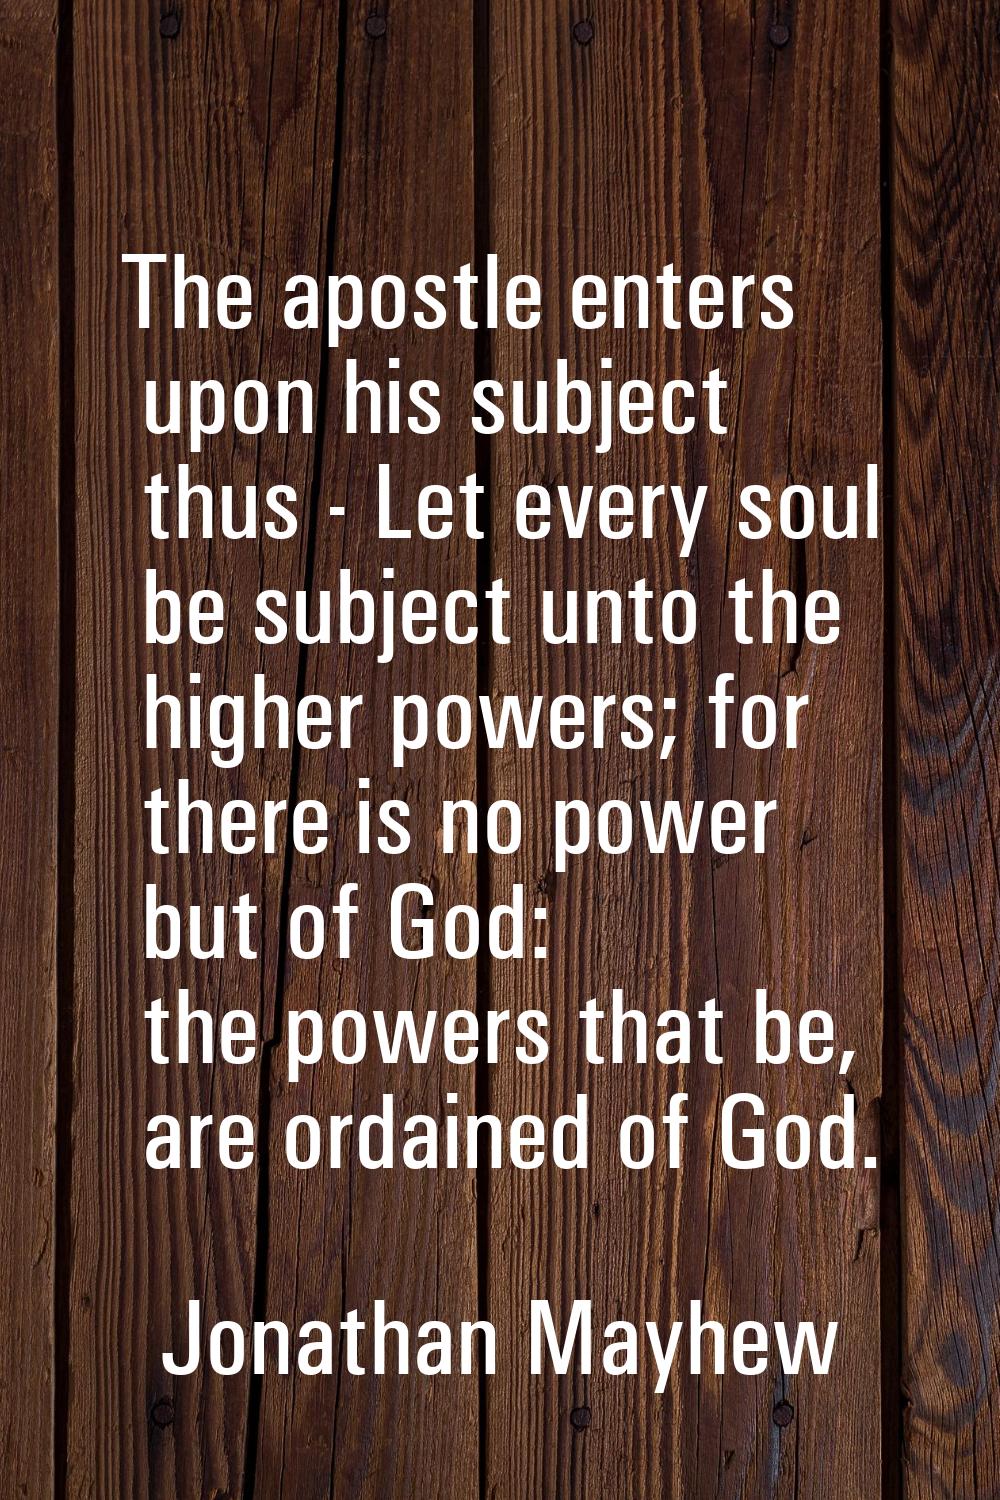 The apostle enters upon his subject thus - Let every soul be subject unto the higher powers; for th